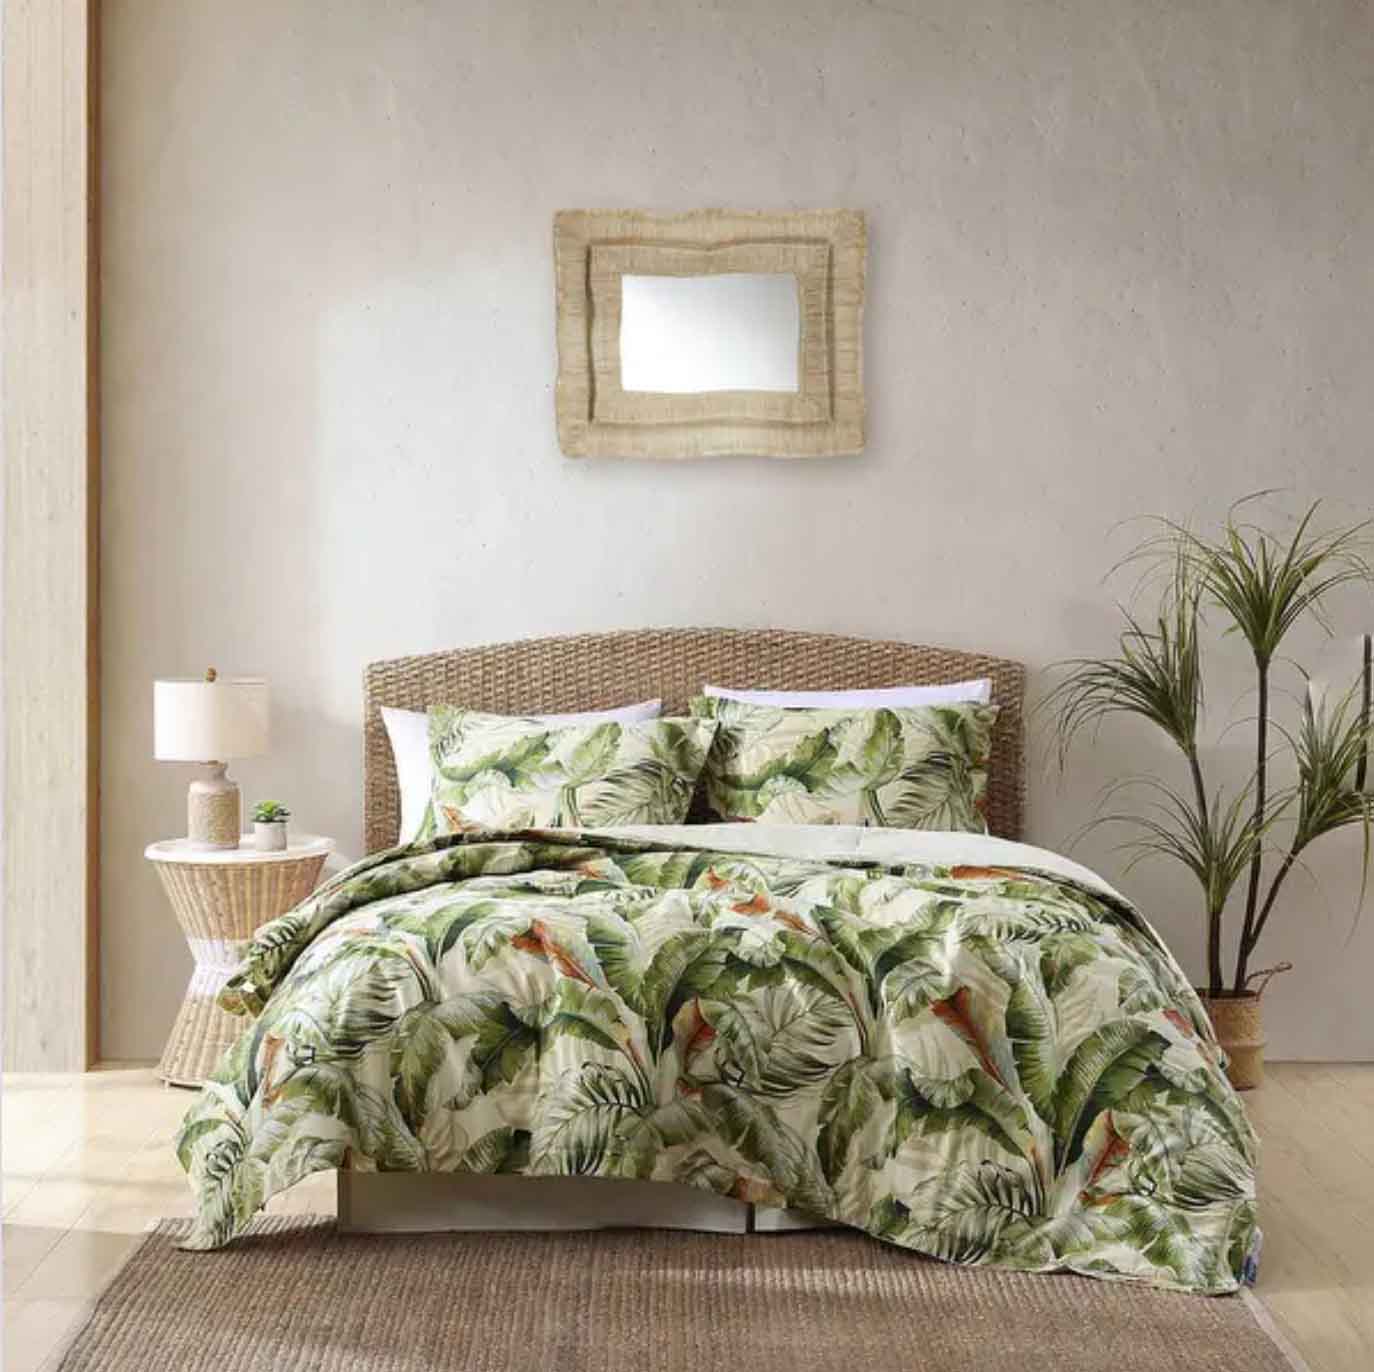 Patterned bedsheet in green and cream